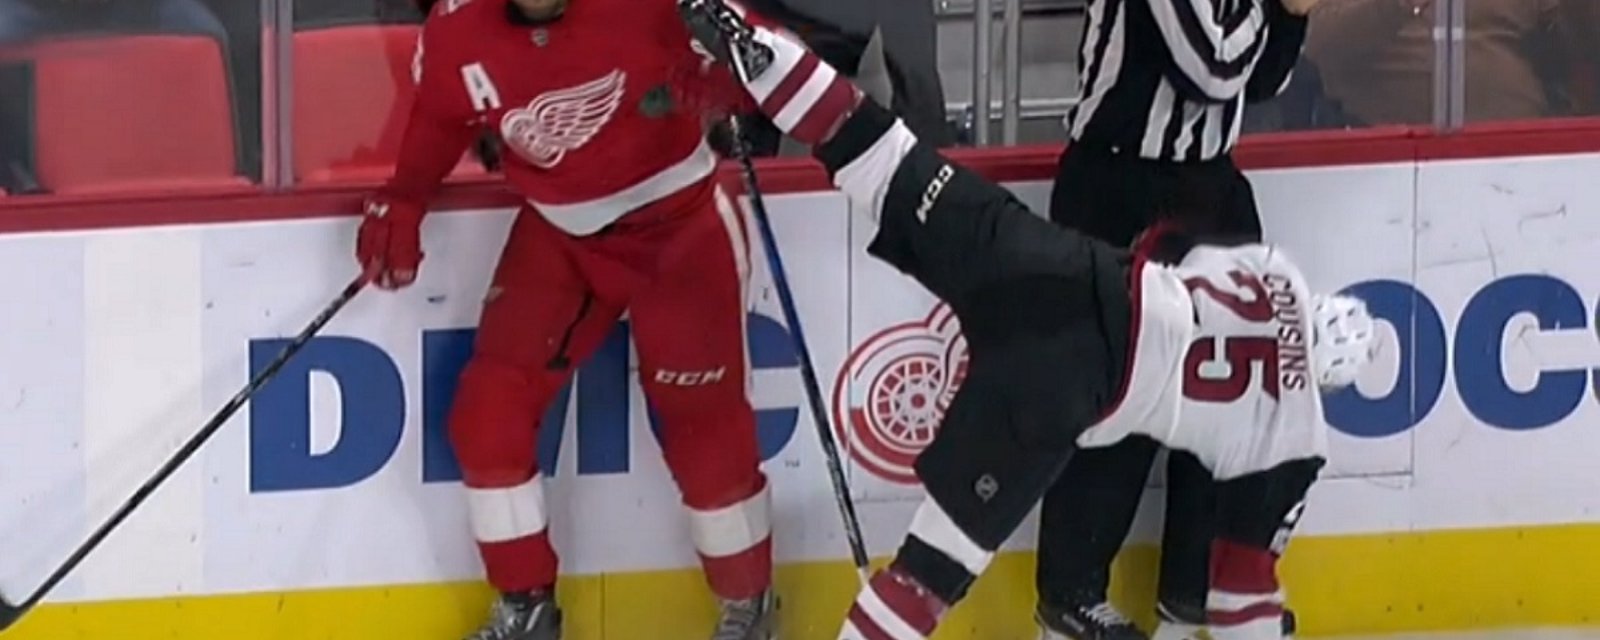 Nick Cousins gets Kronwalled on Tuesday night.